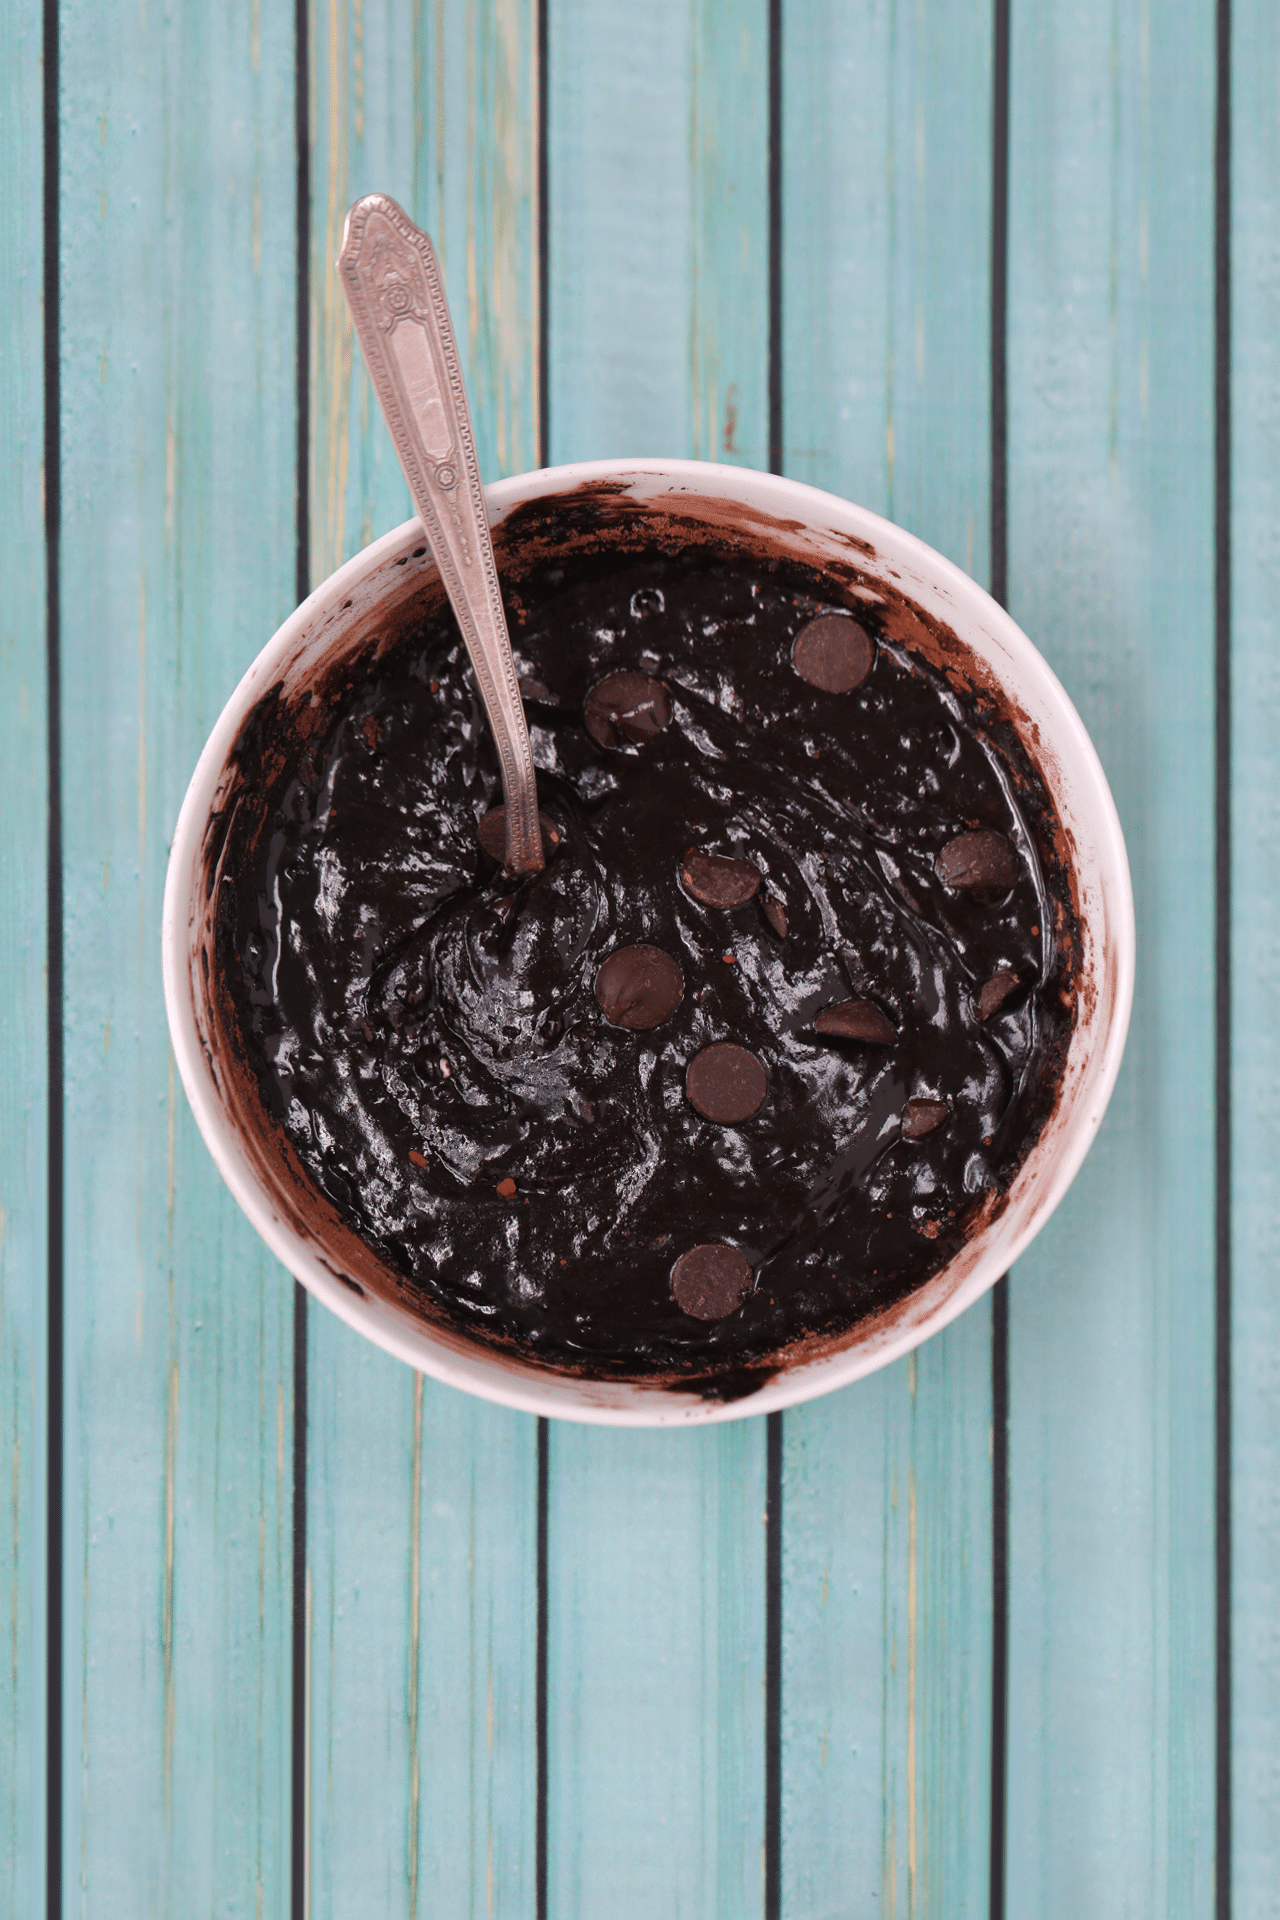 Brownie bowl batter is looking rich, thick and smooth. topped with chocolate chips, ready for cooking in the microwave. 